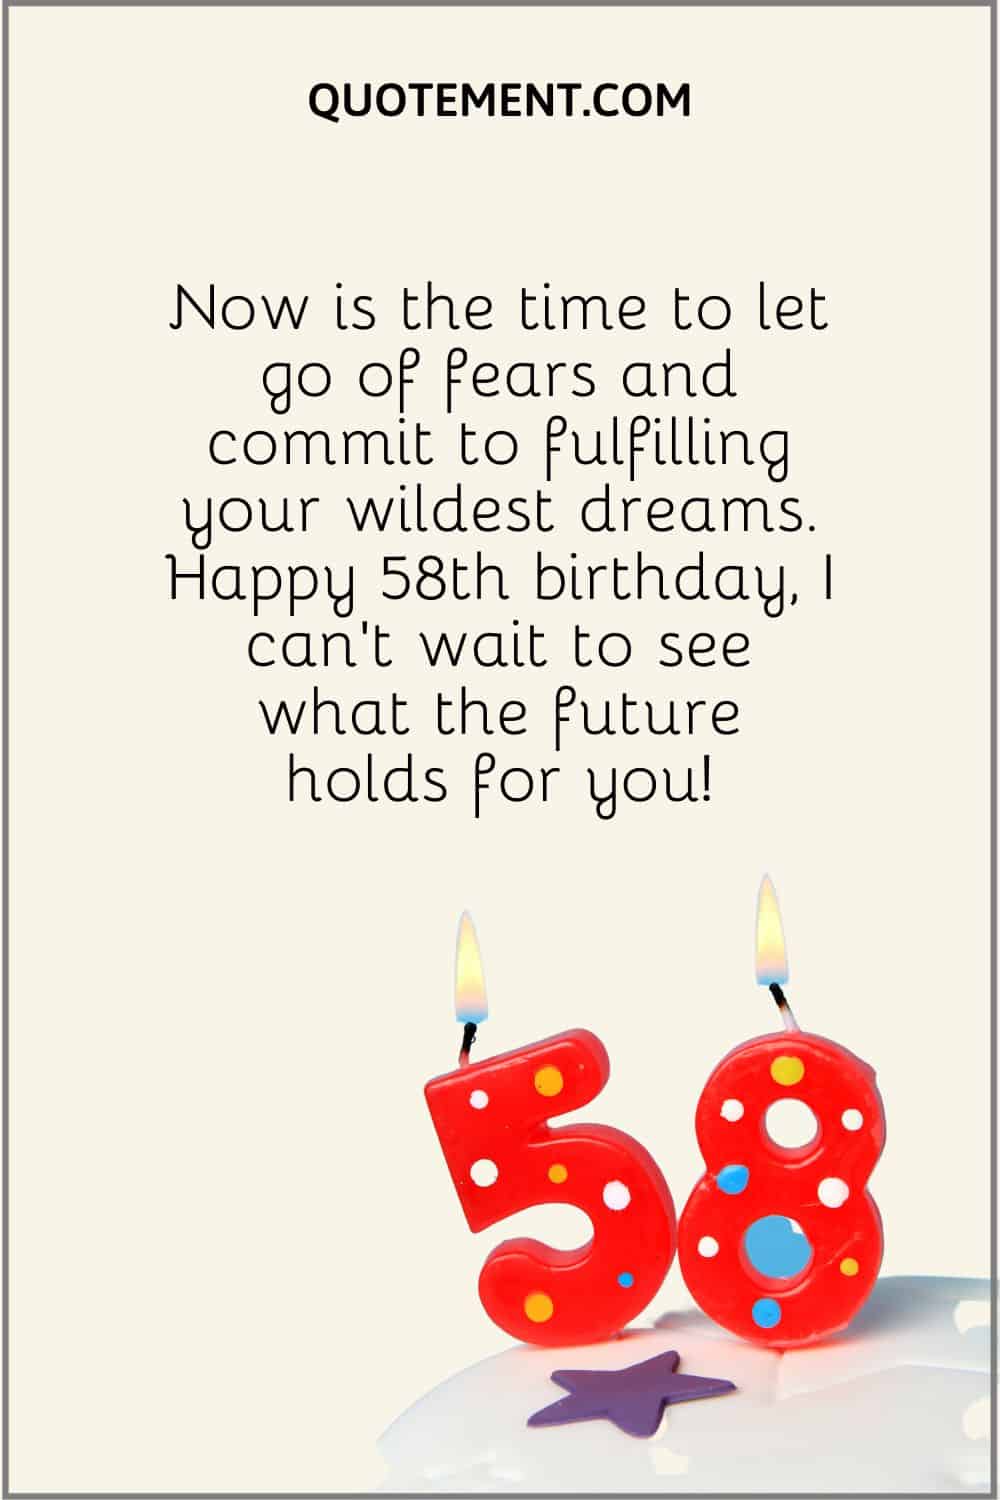 “Now is the time to let go of fears and commit to fulfilling your wildest dreams. Happy 58th birthday, I can’t wait to see what the future holds for you!”